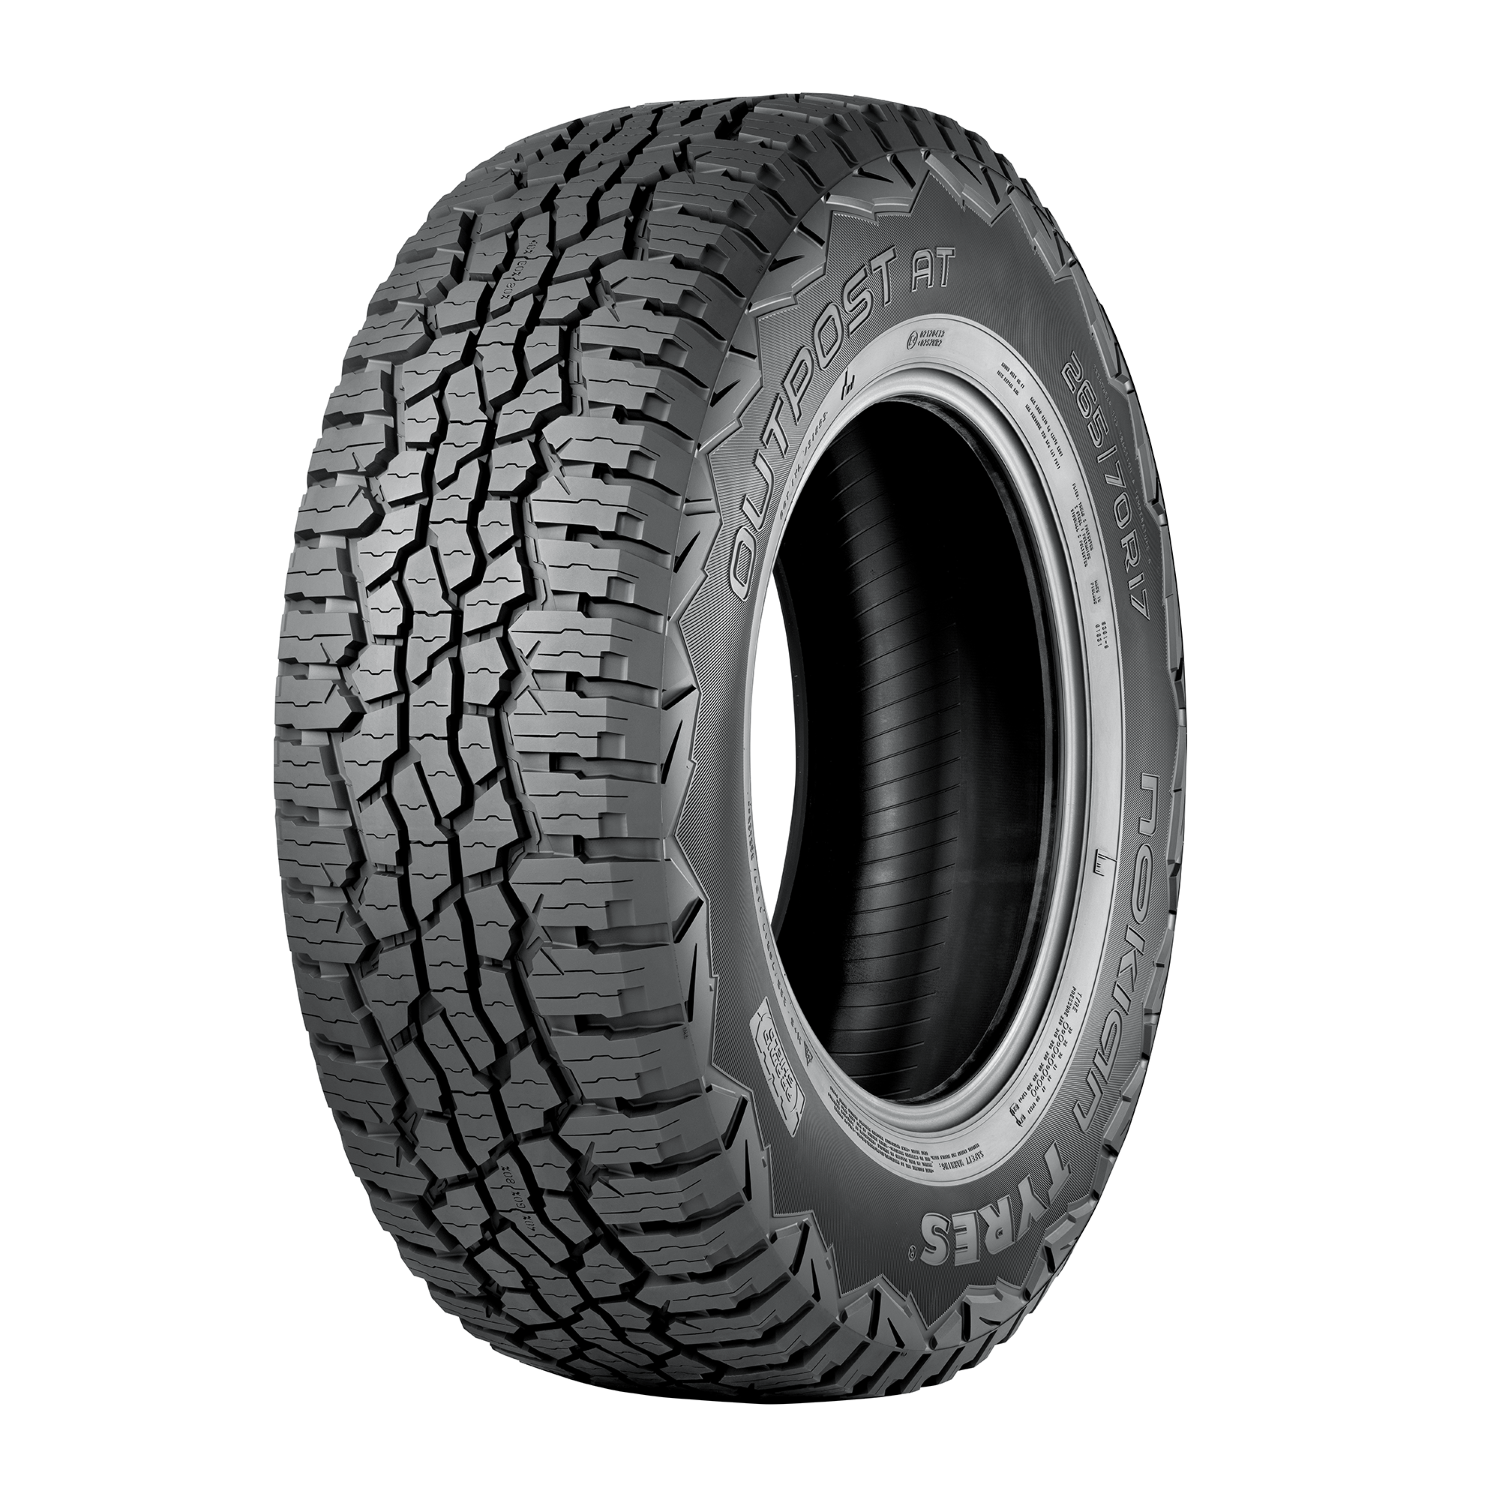 Nokian Outpost AT Tests and Reviews - Tire